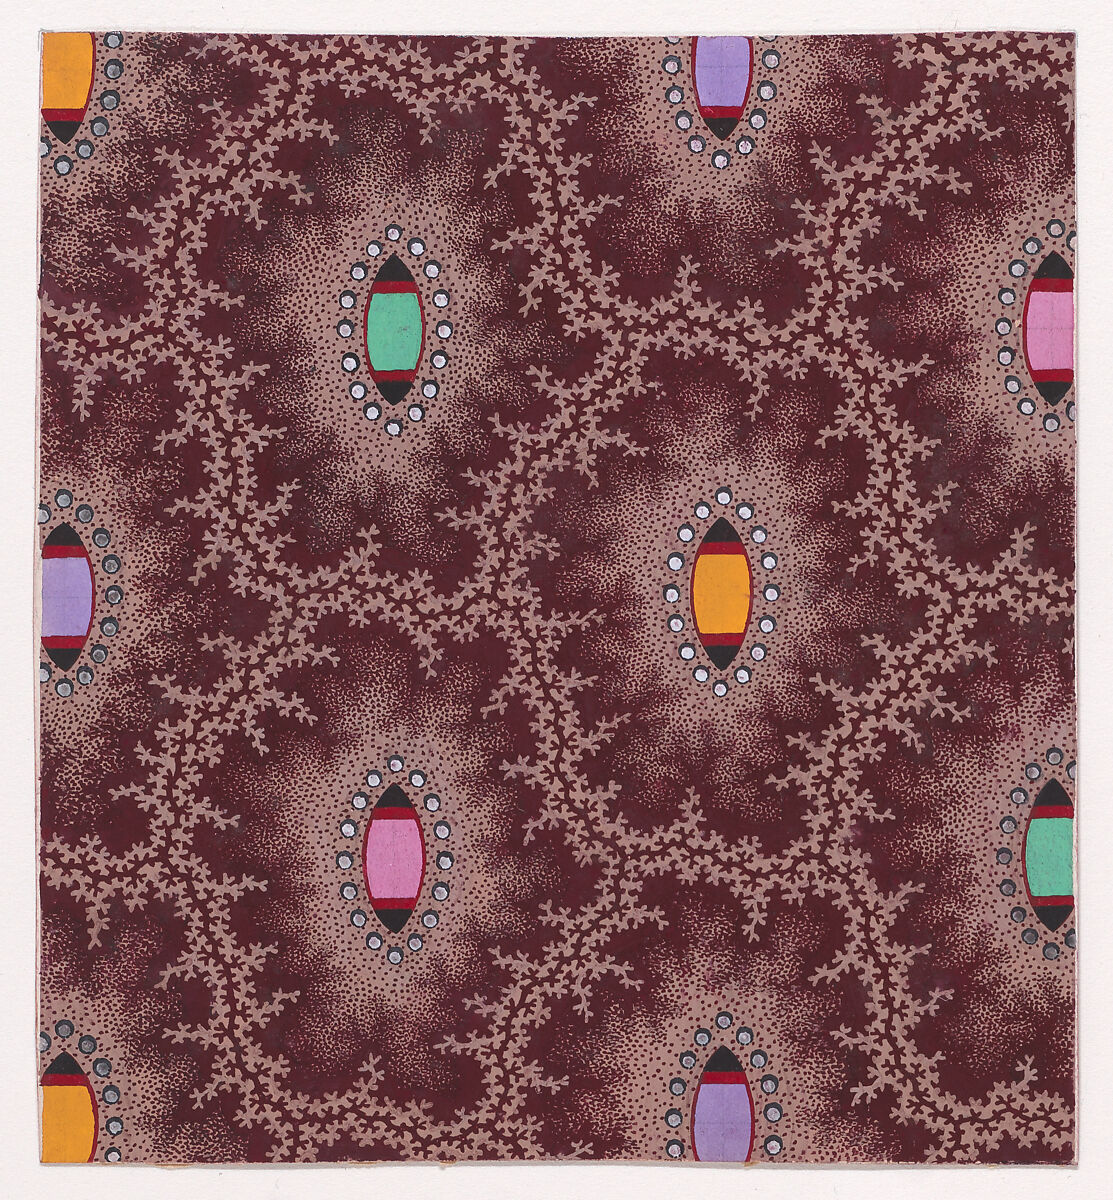 Textile Design with Alternating Vertical Rows of Shuttle Shapes and Pearls Framed by Interlacing Garlands of Branches, Anonymous, Alsatian, 19th century, Gouache 